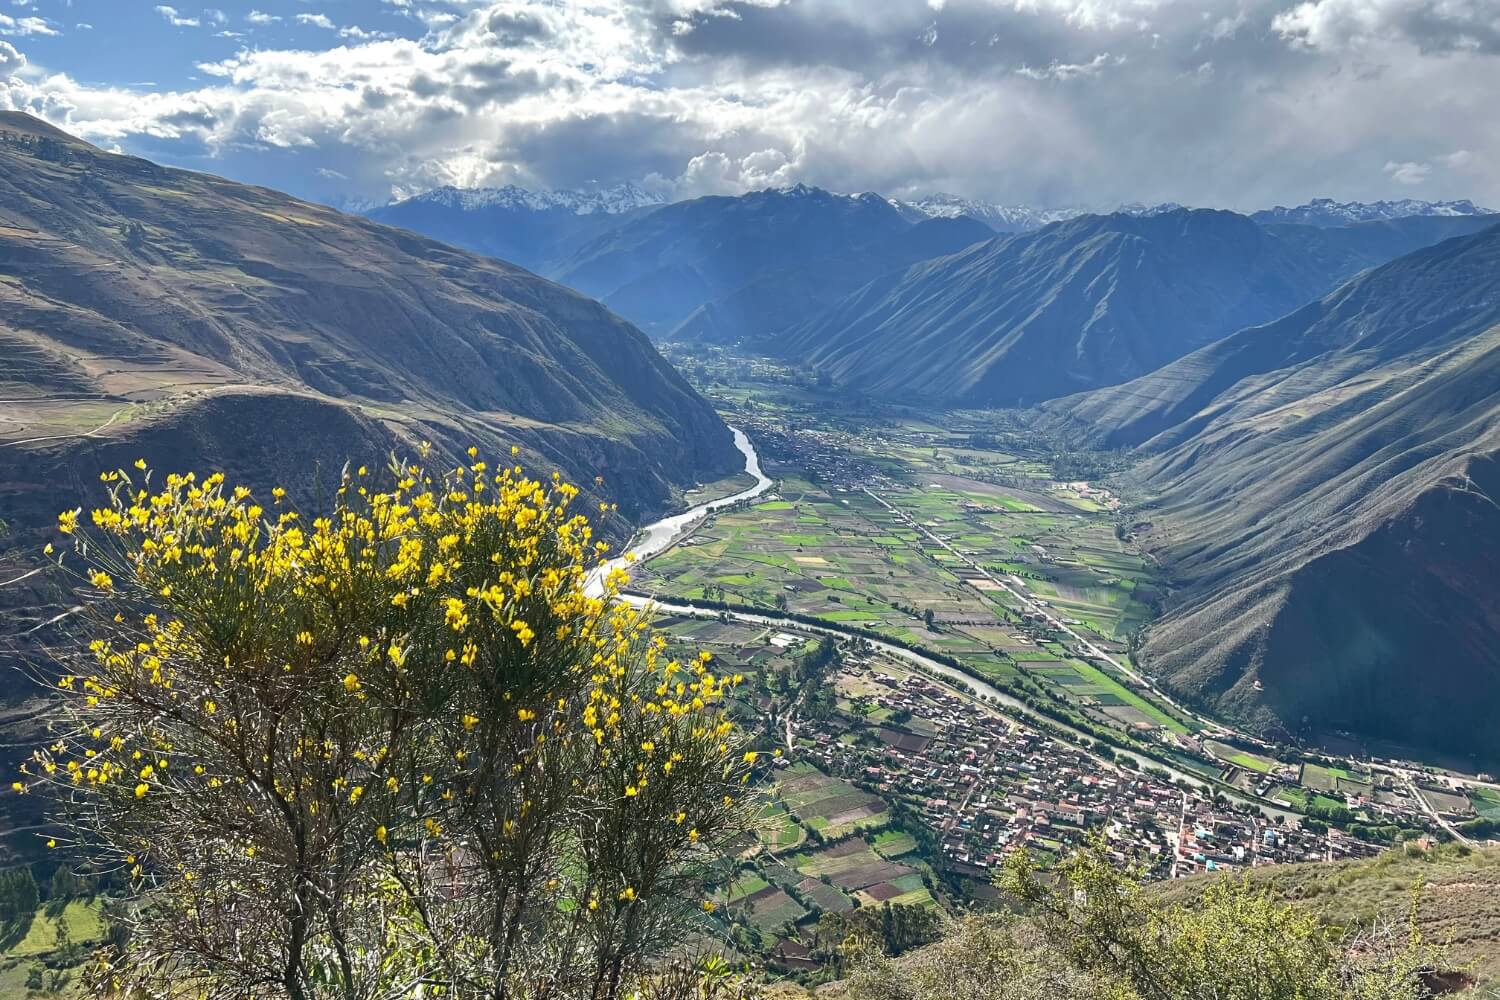 SHOULD I TAKE A GROUP, PRIVATE TOUR OR GO ON MY OWN TO THE SACRED VALLEY?